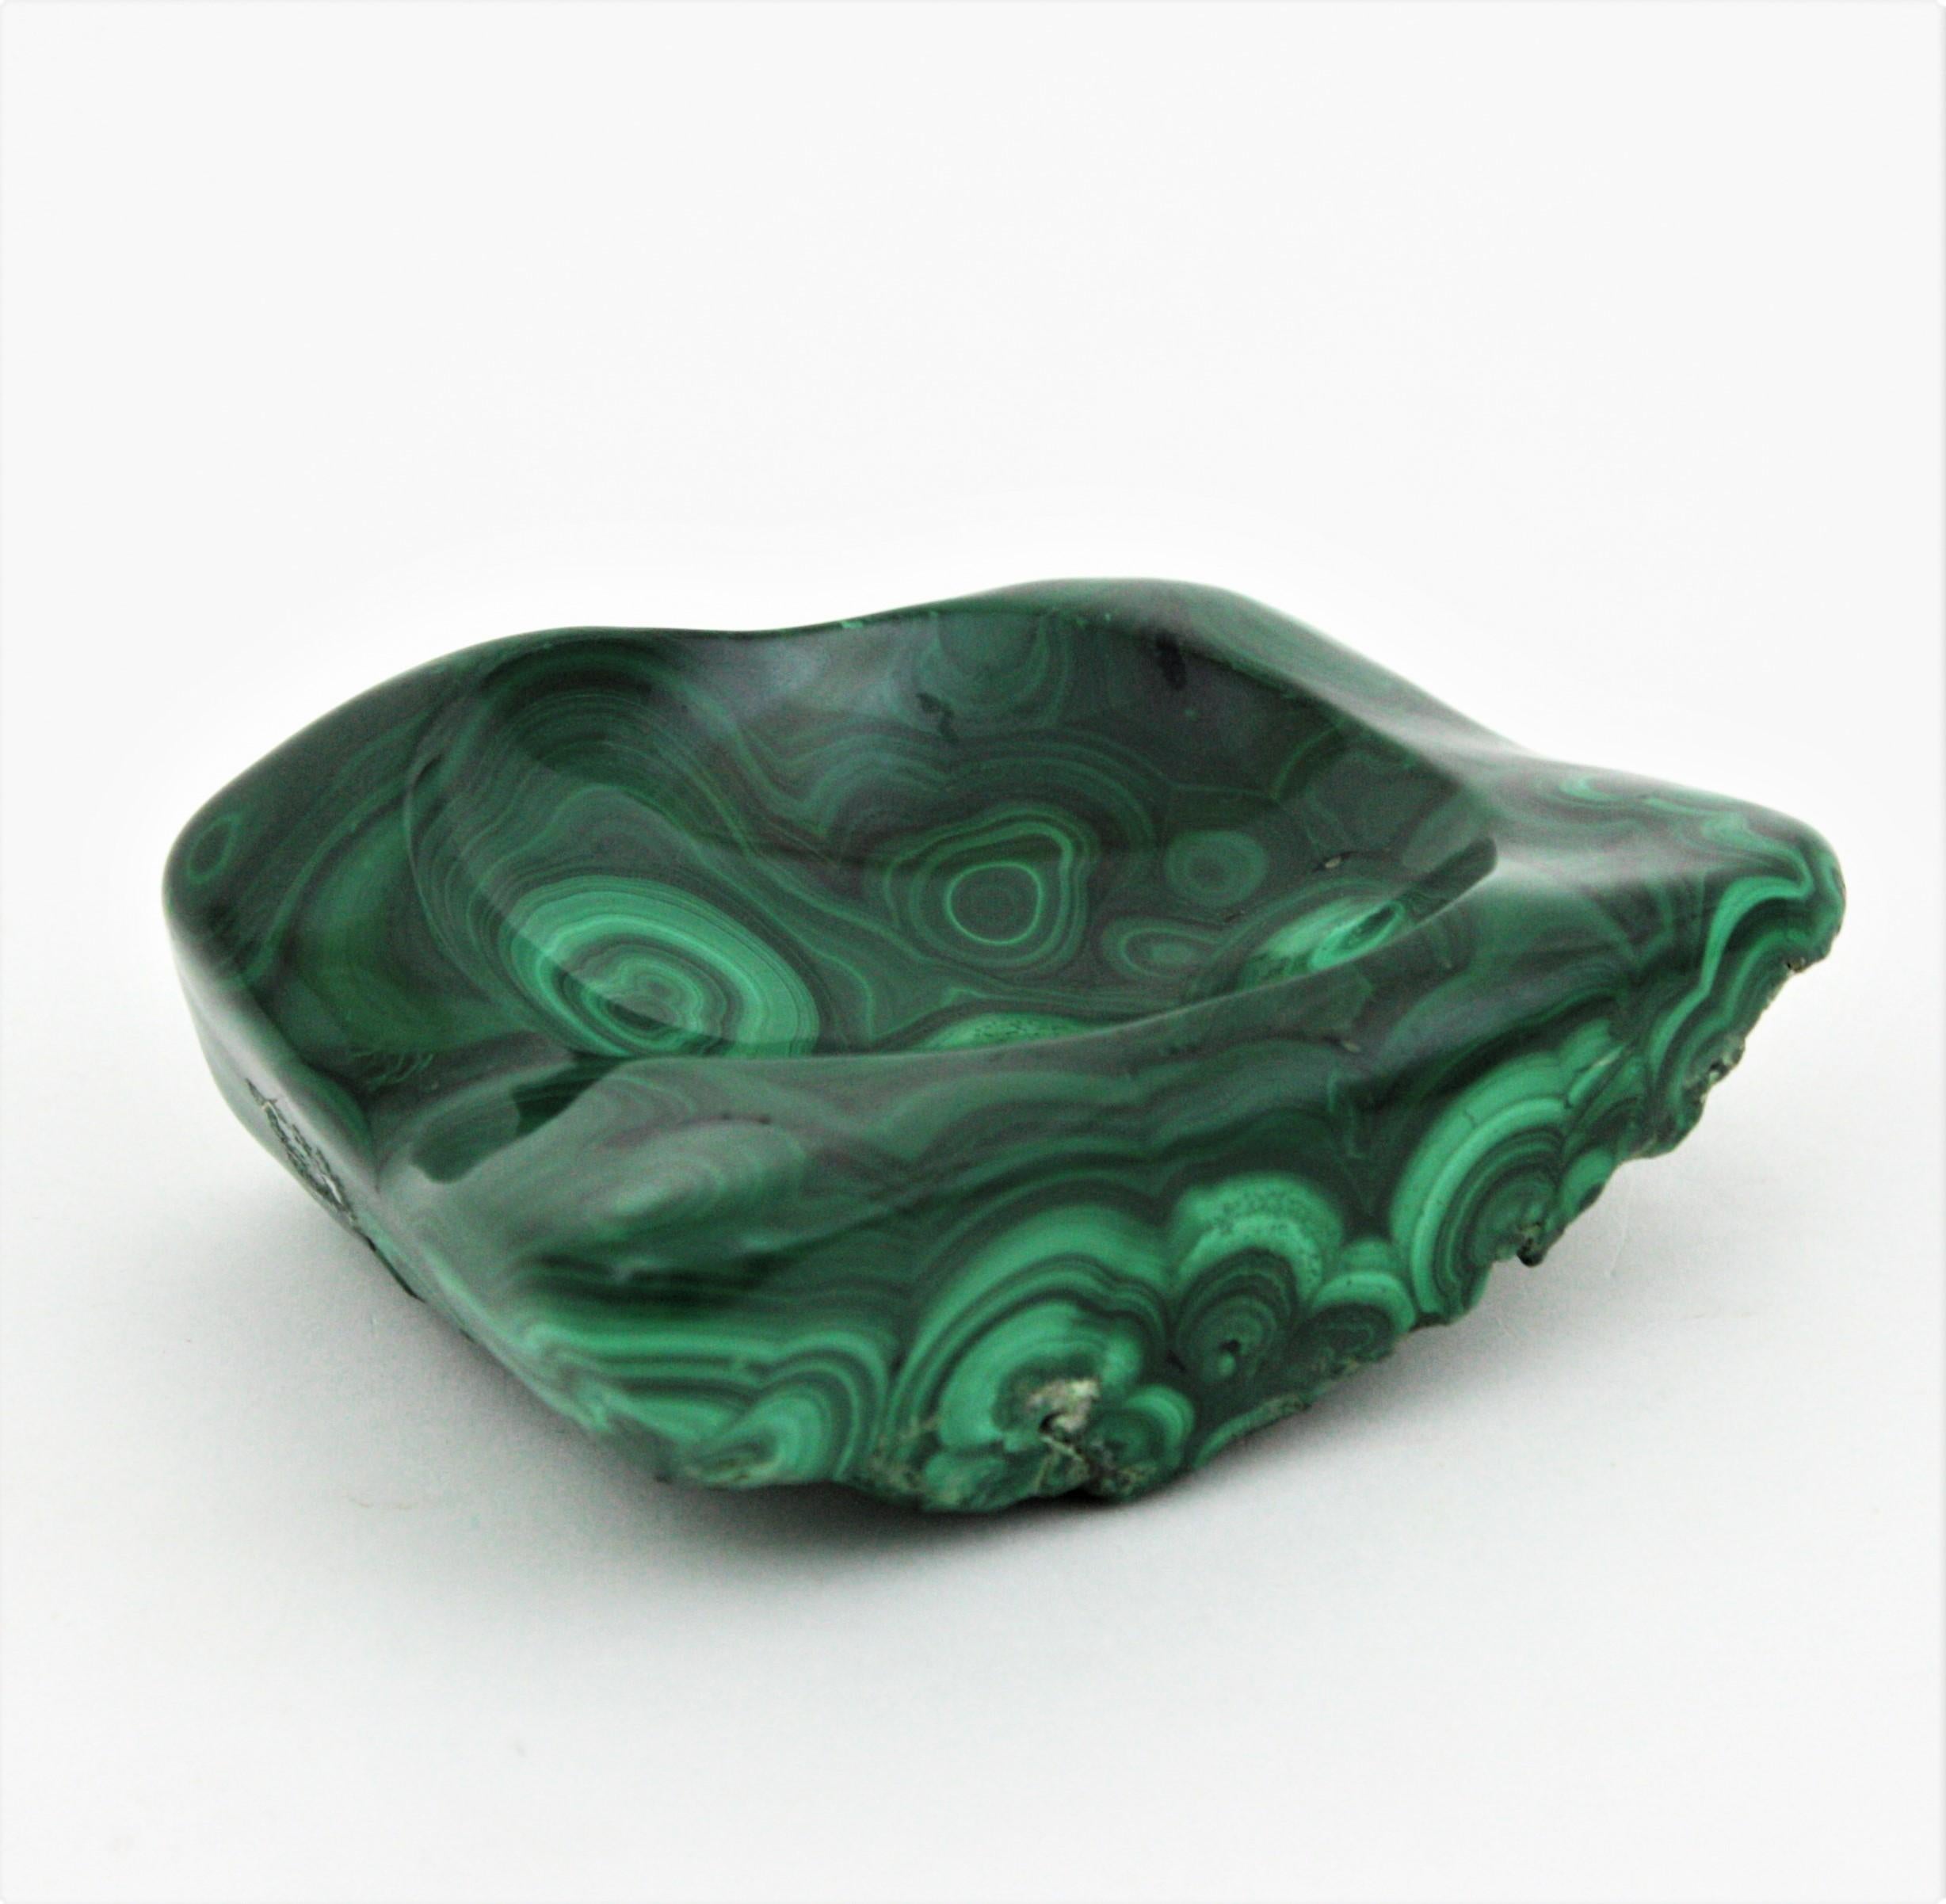 Lovely natural malachite stone hand carved bowl or ashtray, Spain, 1950s-1960s.
Carved and polished malachite showing the mineral’s distinctive banding striations in different shades of green.
The underside remains unpolished.
Beautiful to be